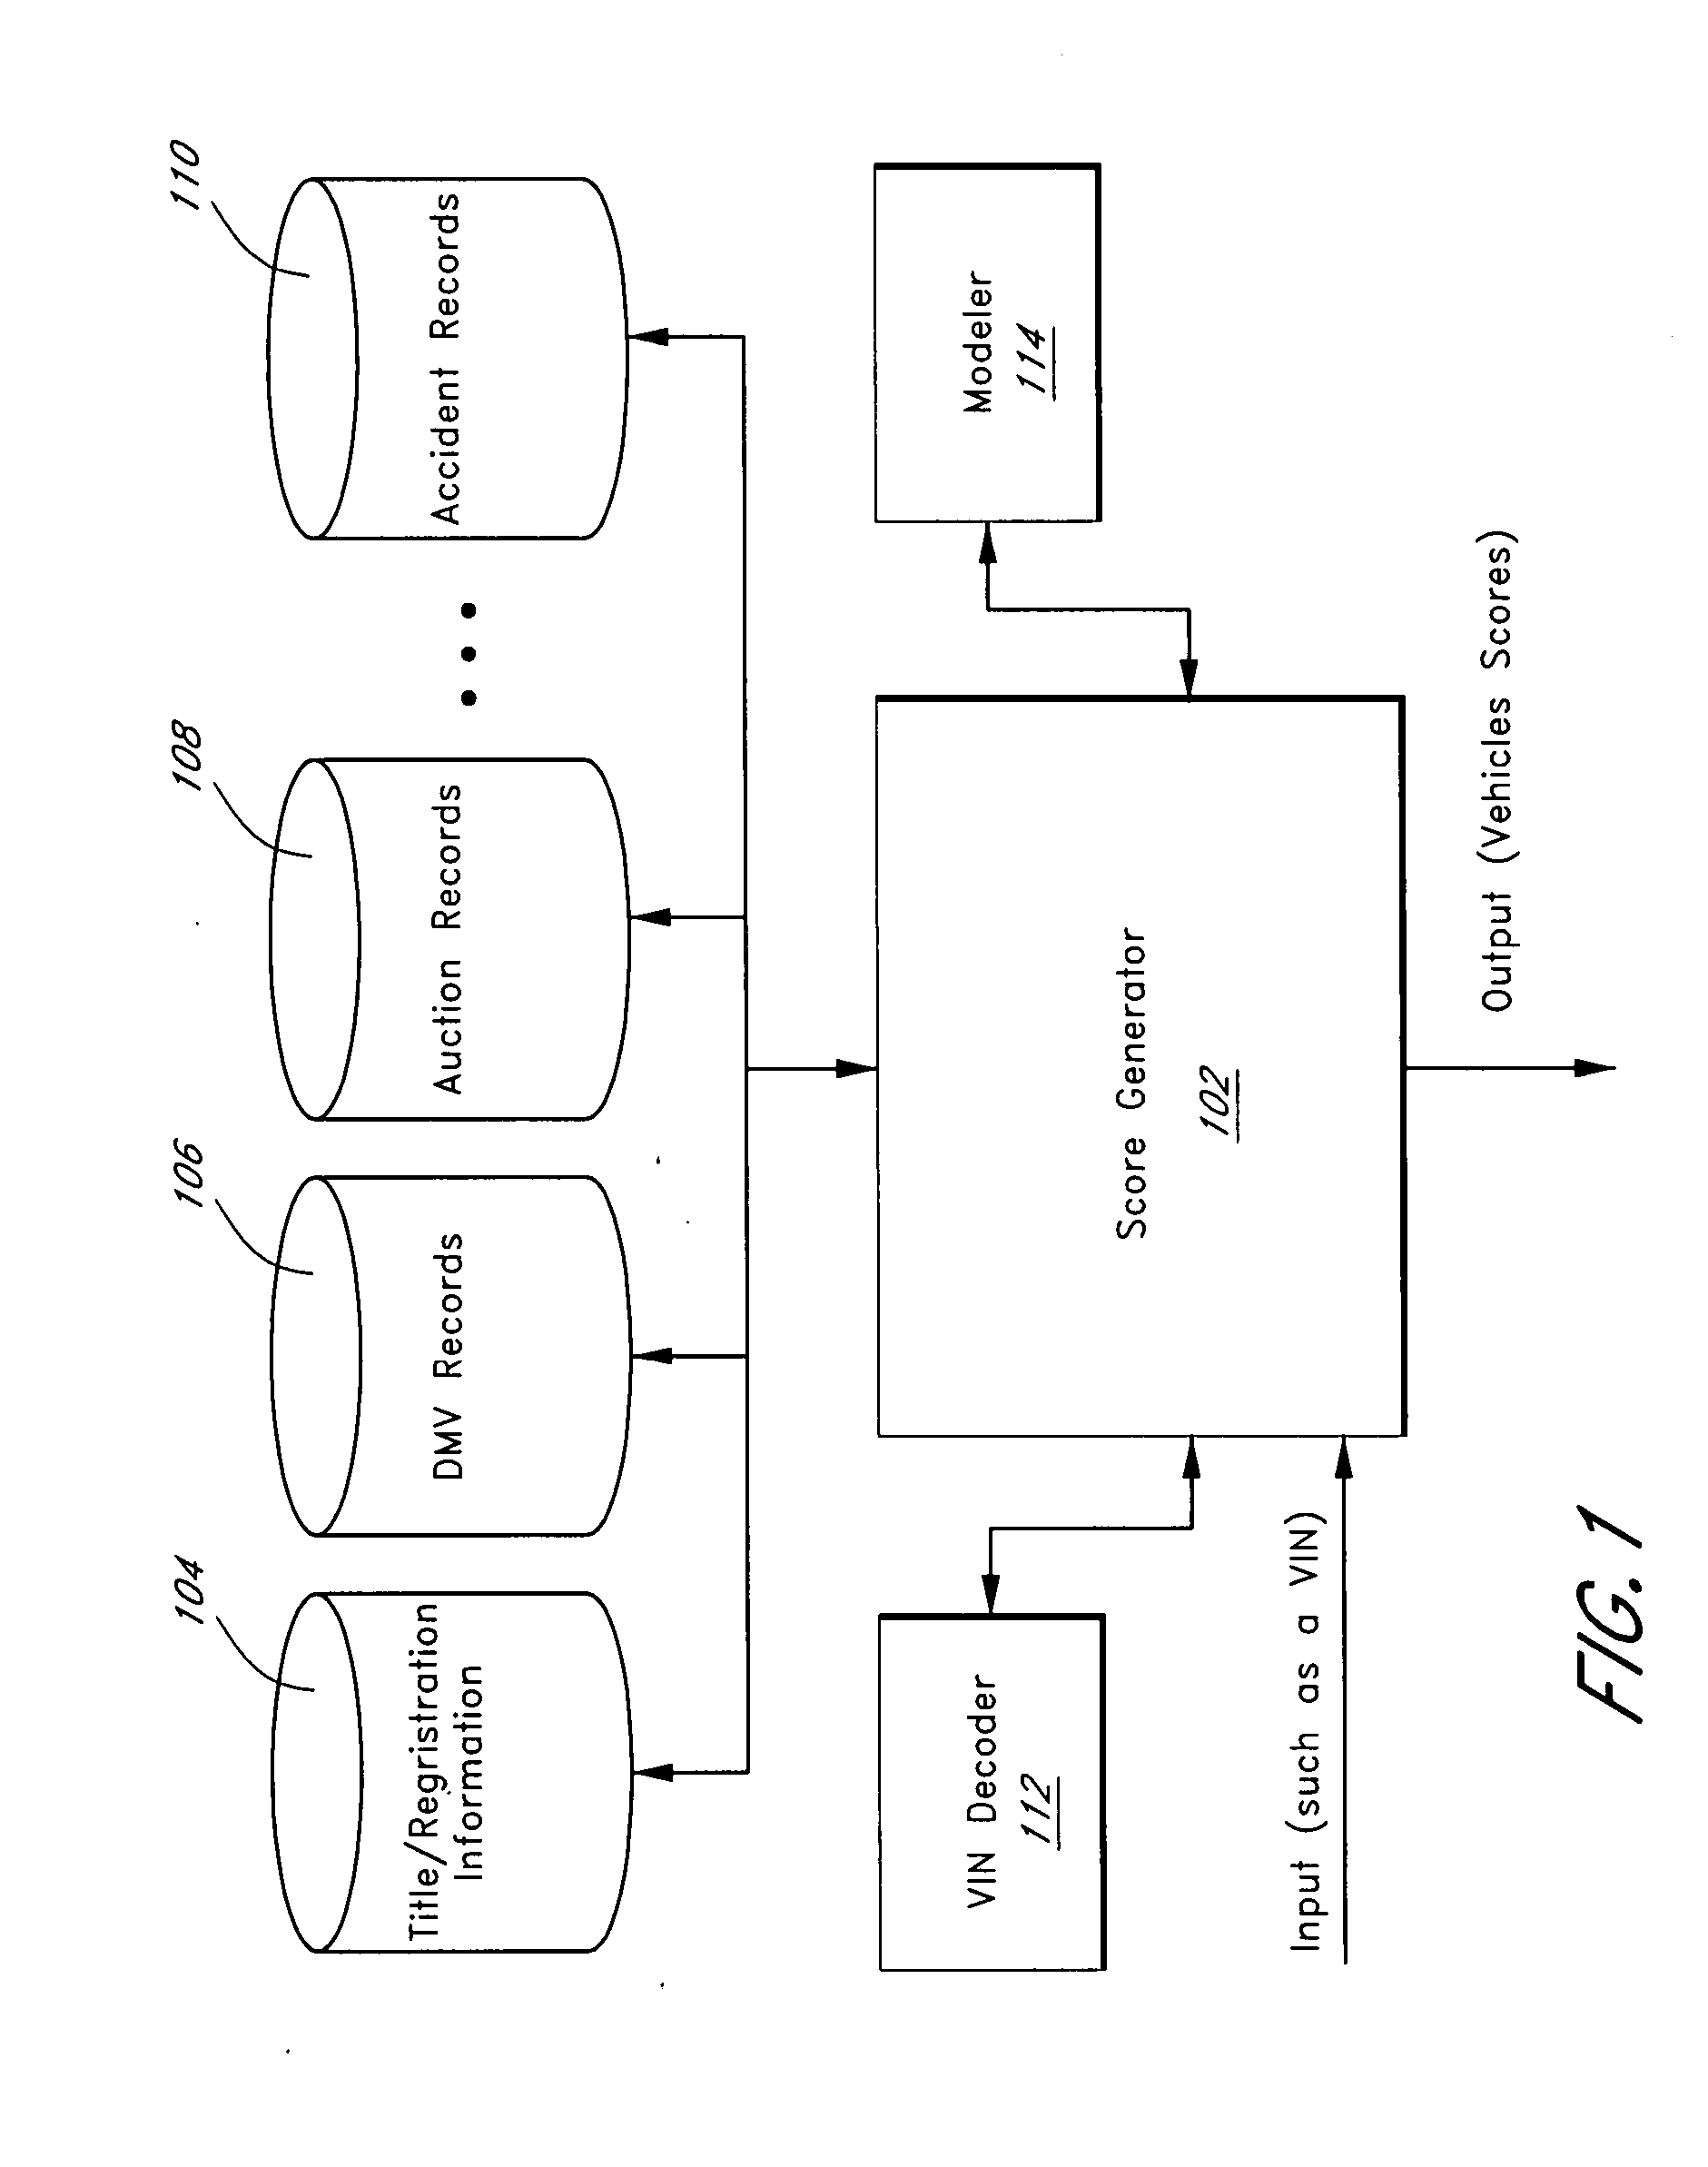 System and method for providing a score for a used vehicle